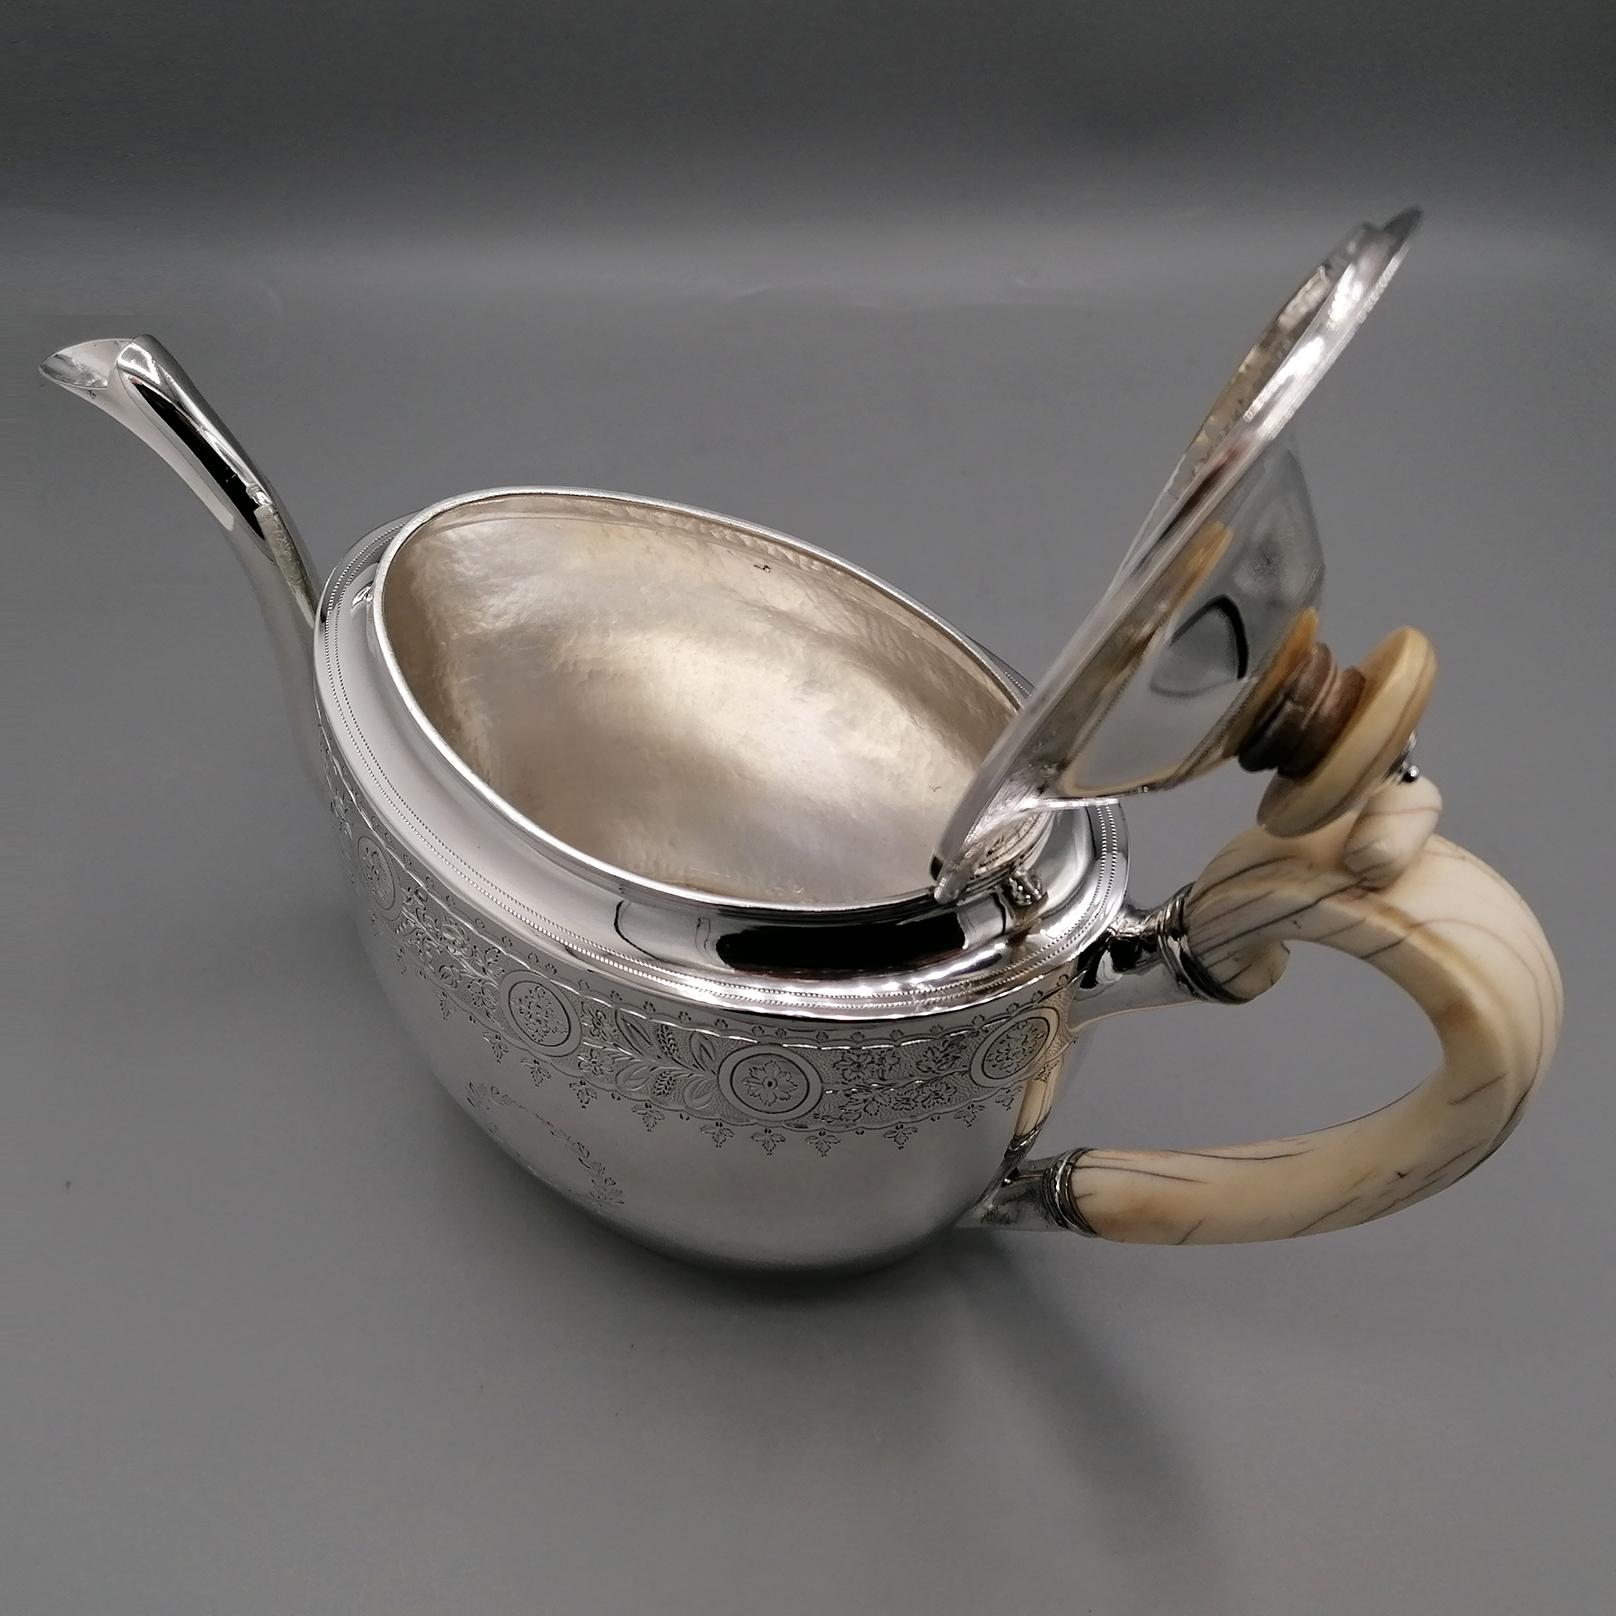 Antique George III Sterling Silver Tea-Coffeeset ivory Handles & Tray 1798-1800 For Sale 6